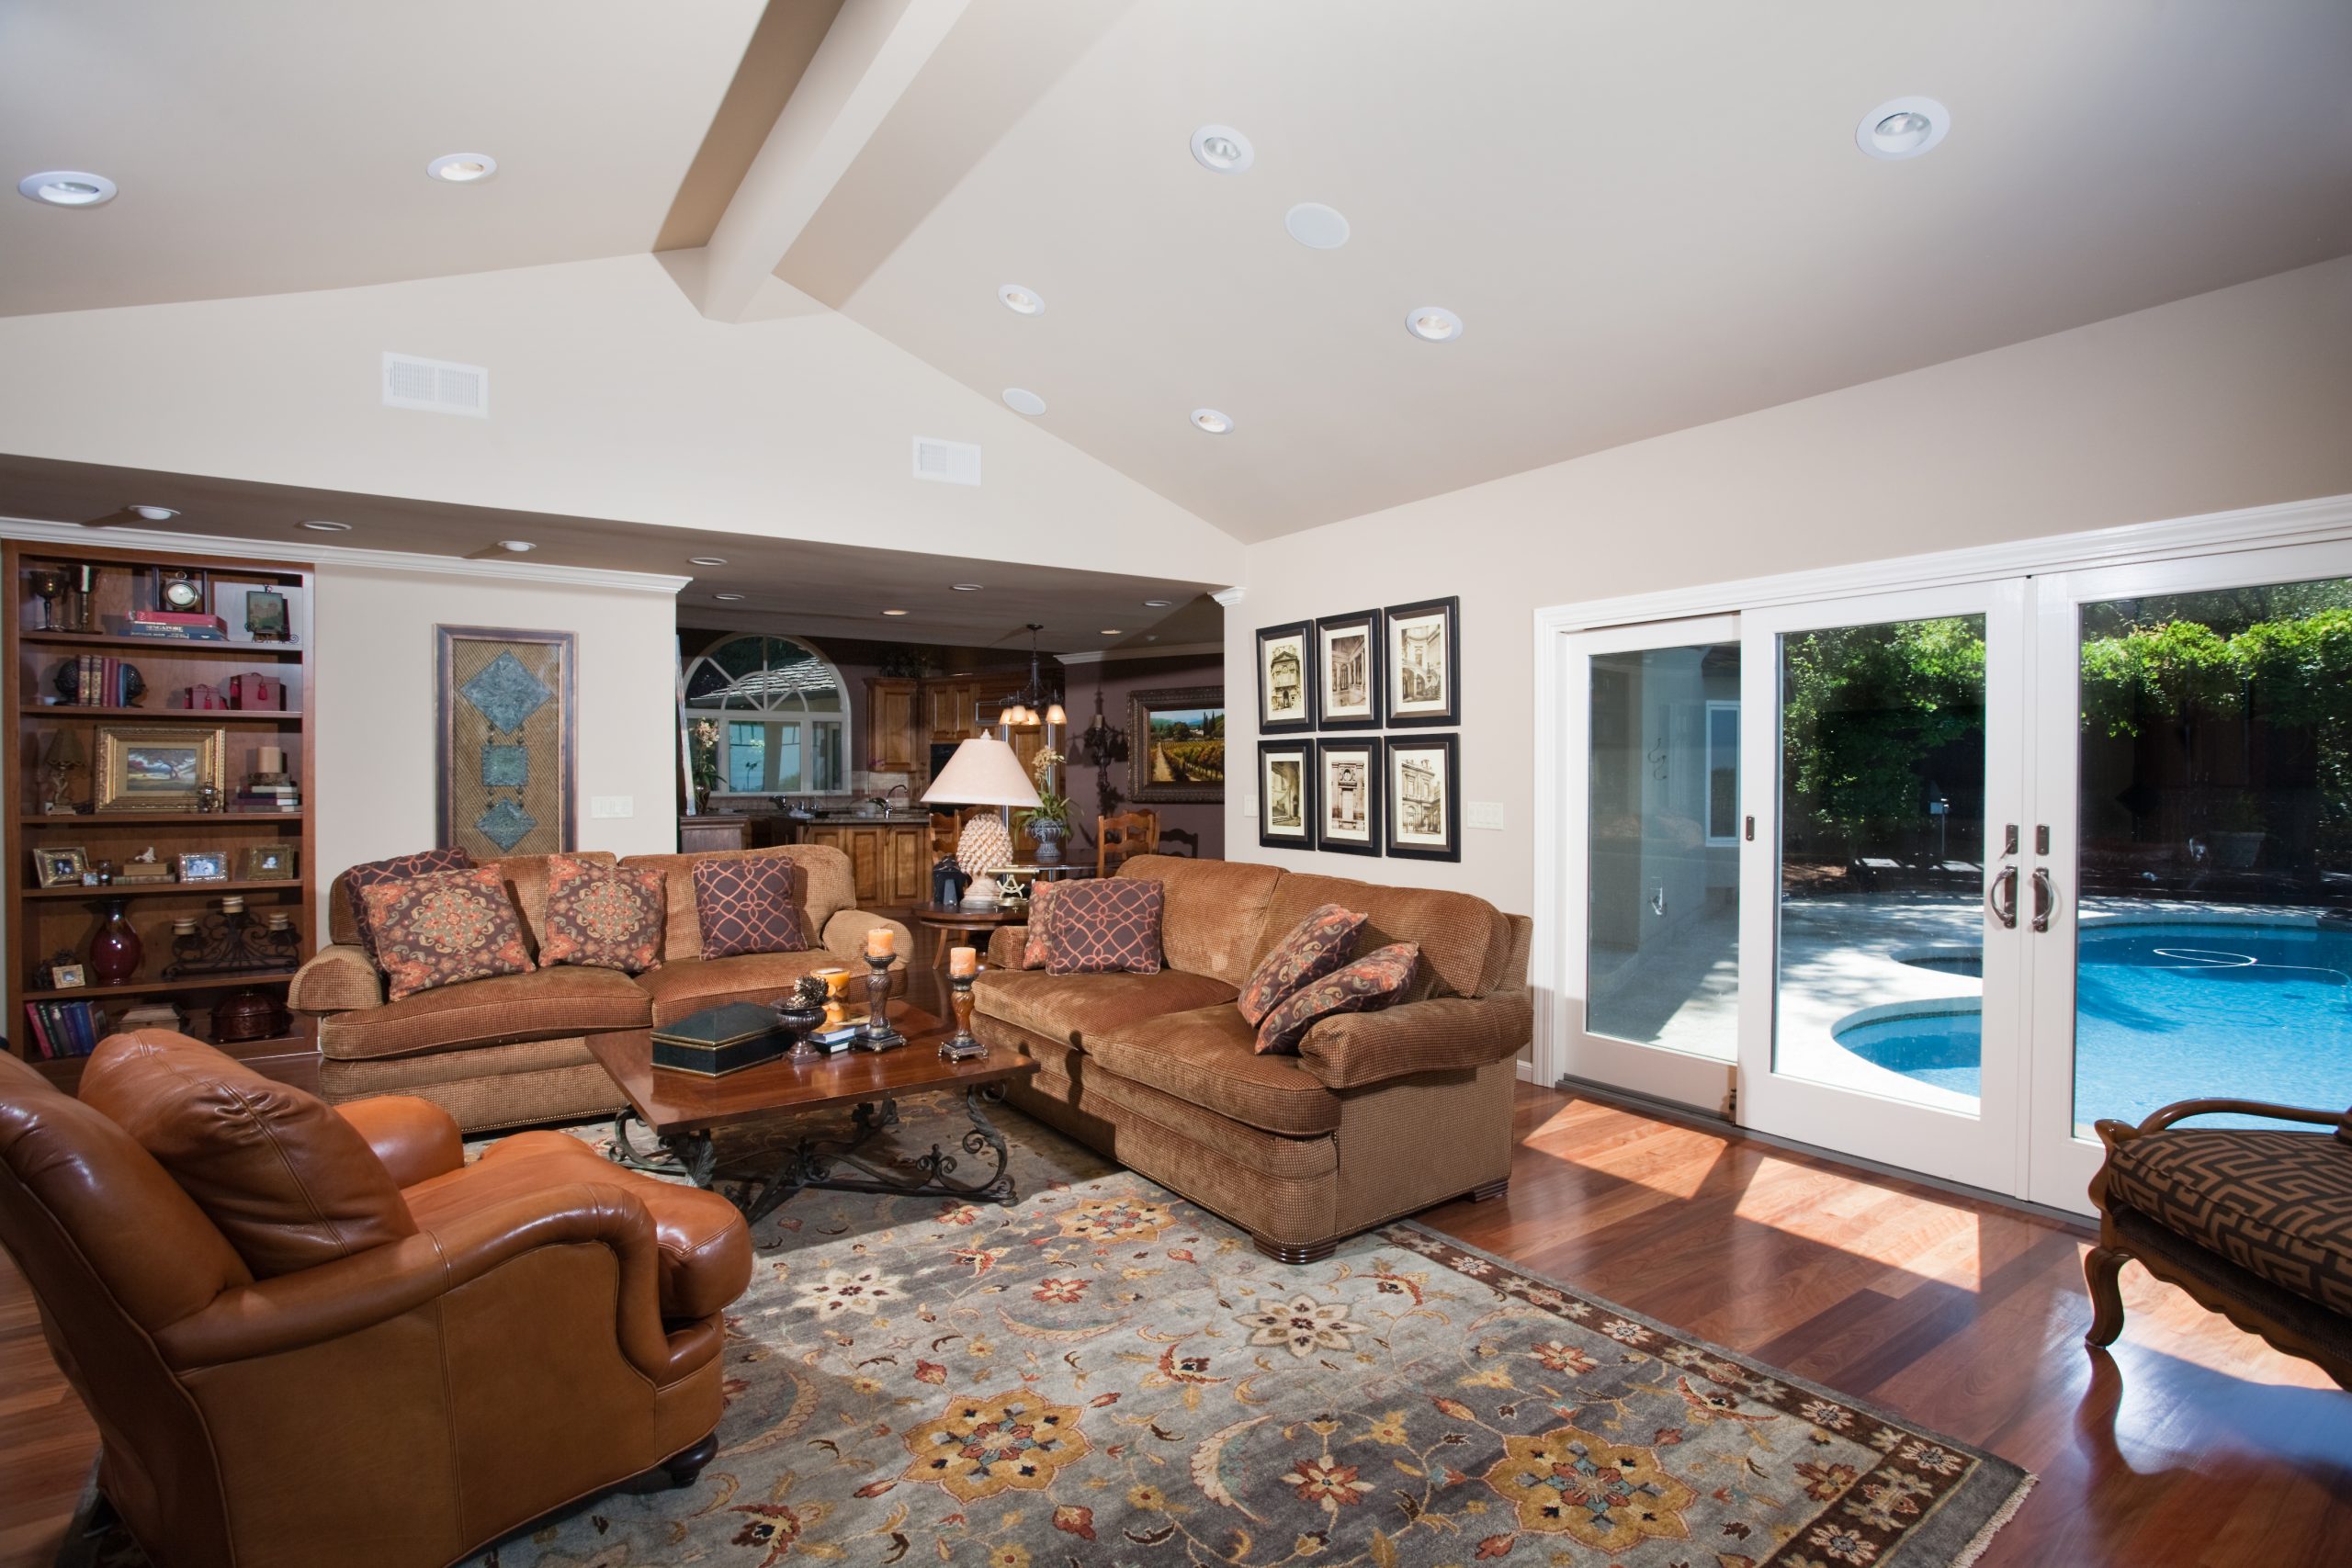 A classic living room with outdoor access to a backyard pool.